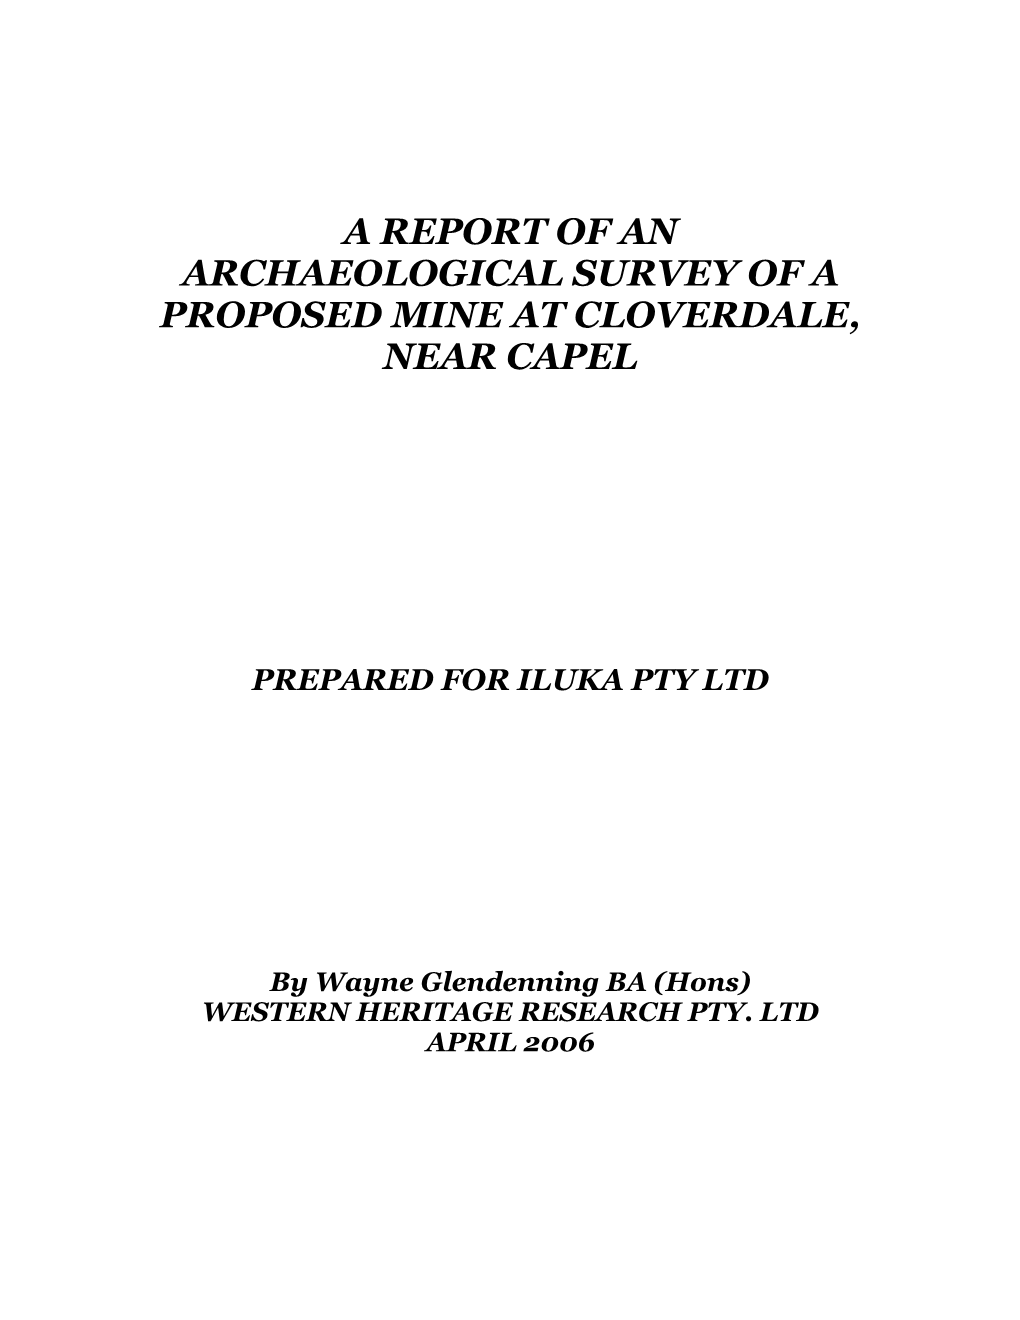 A Report of an Archaeological Survey of a Proposed Mine at Cloverdale, Near Capel